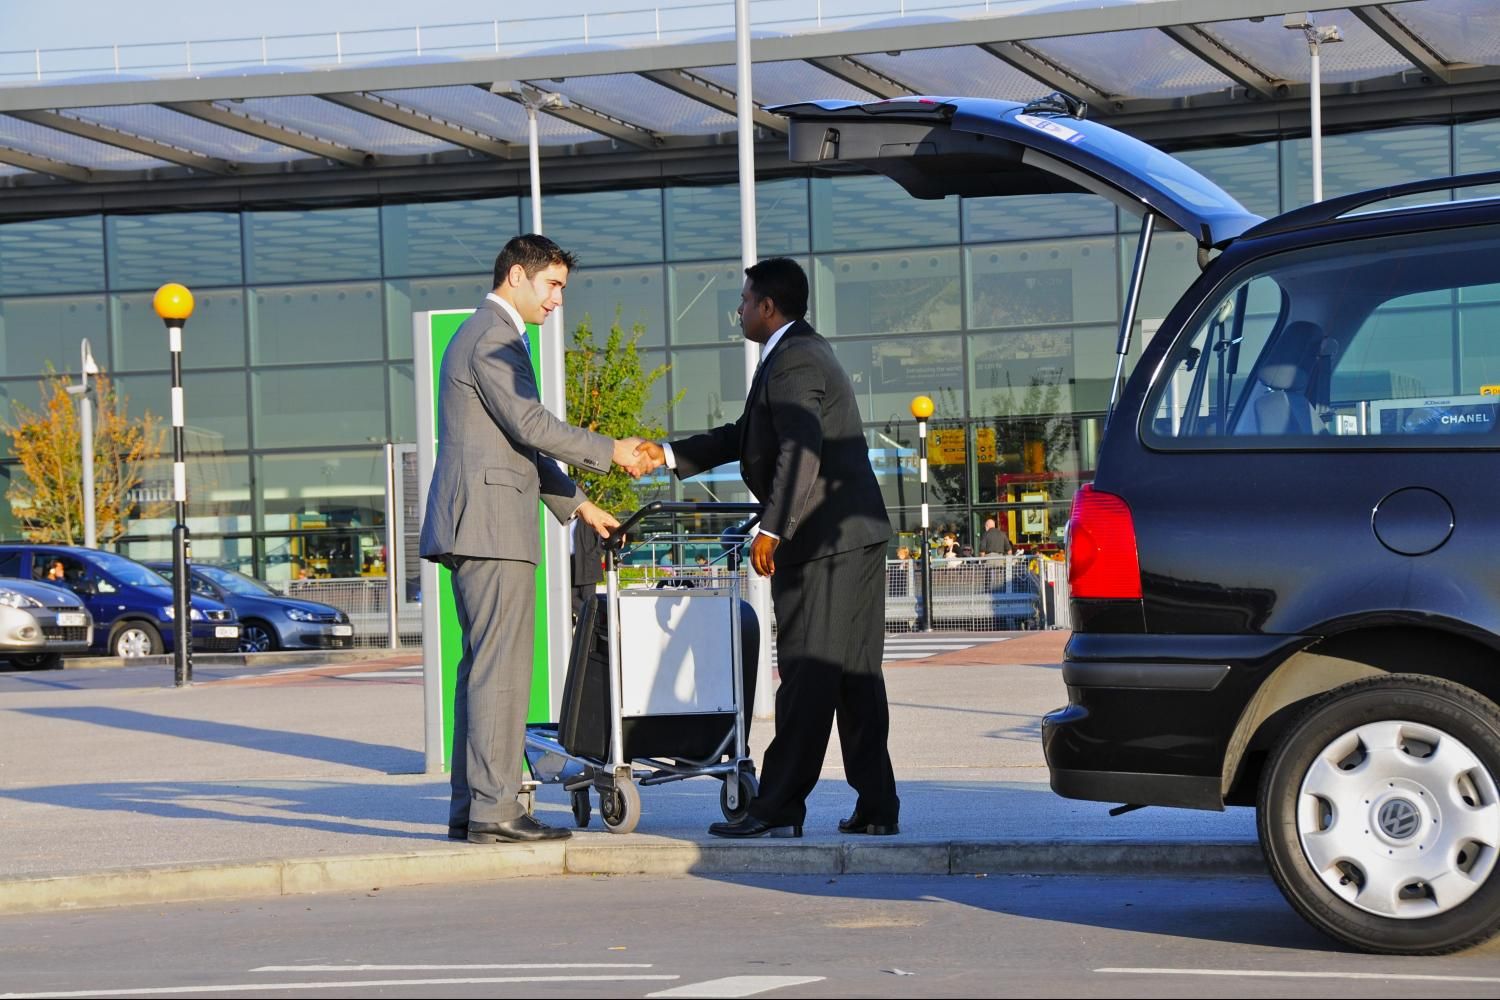 Bristol Airport to Heathrow taxi services